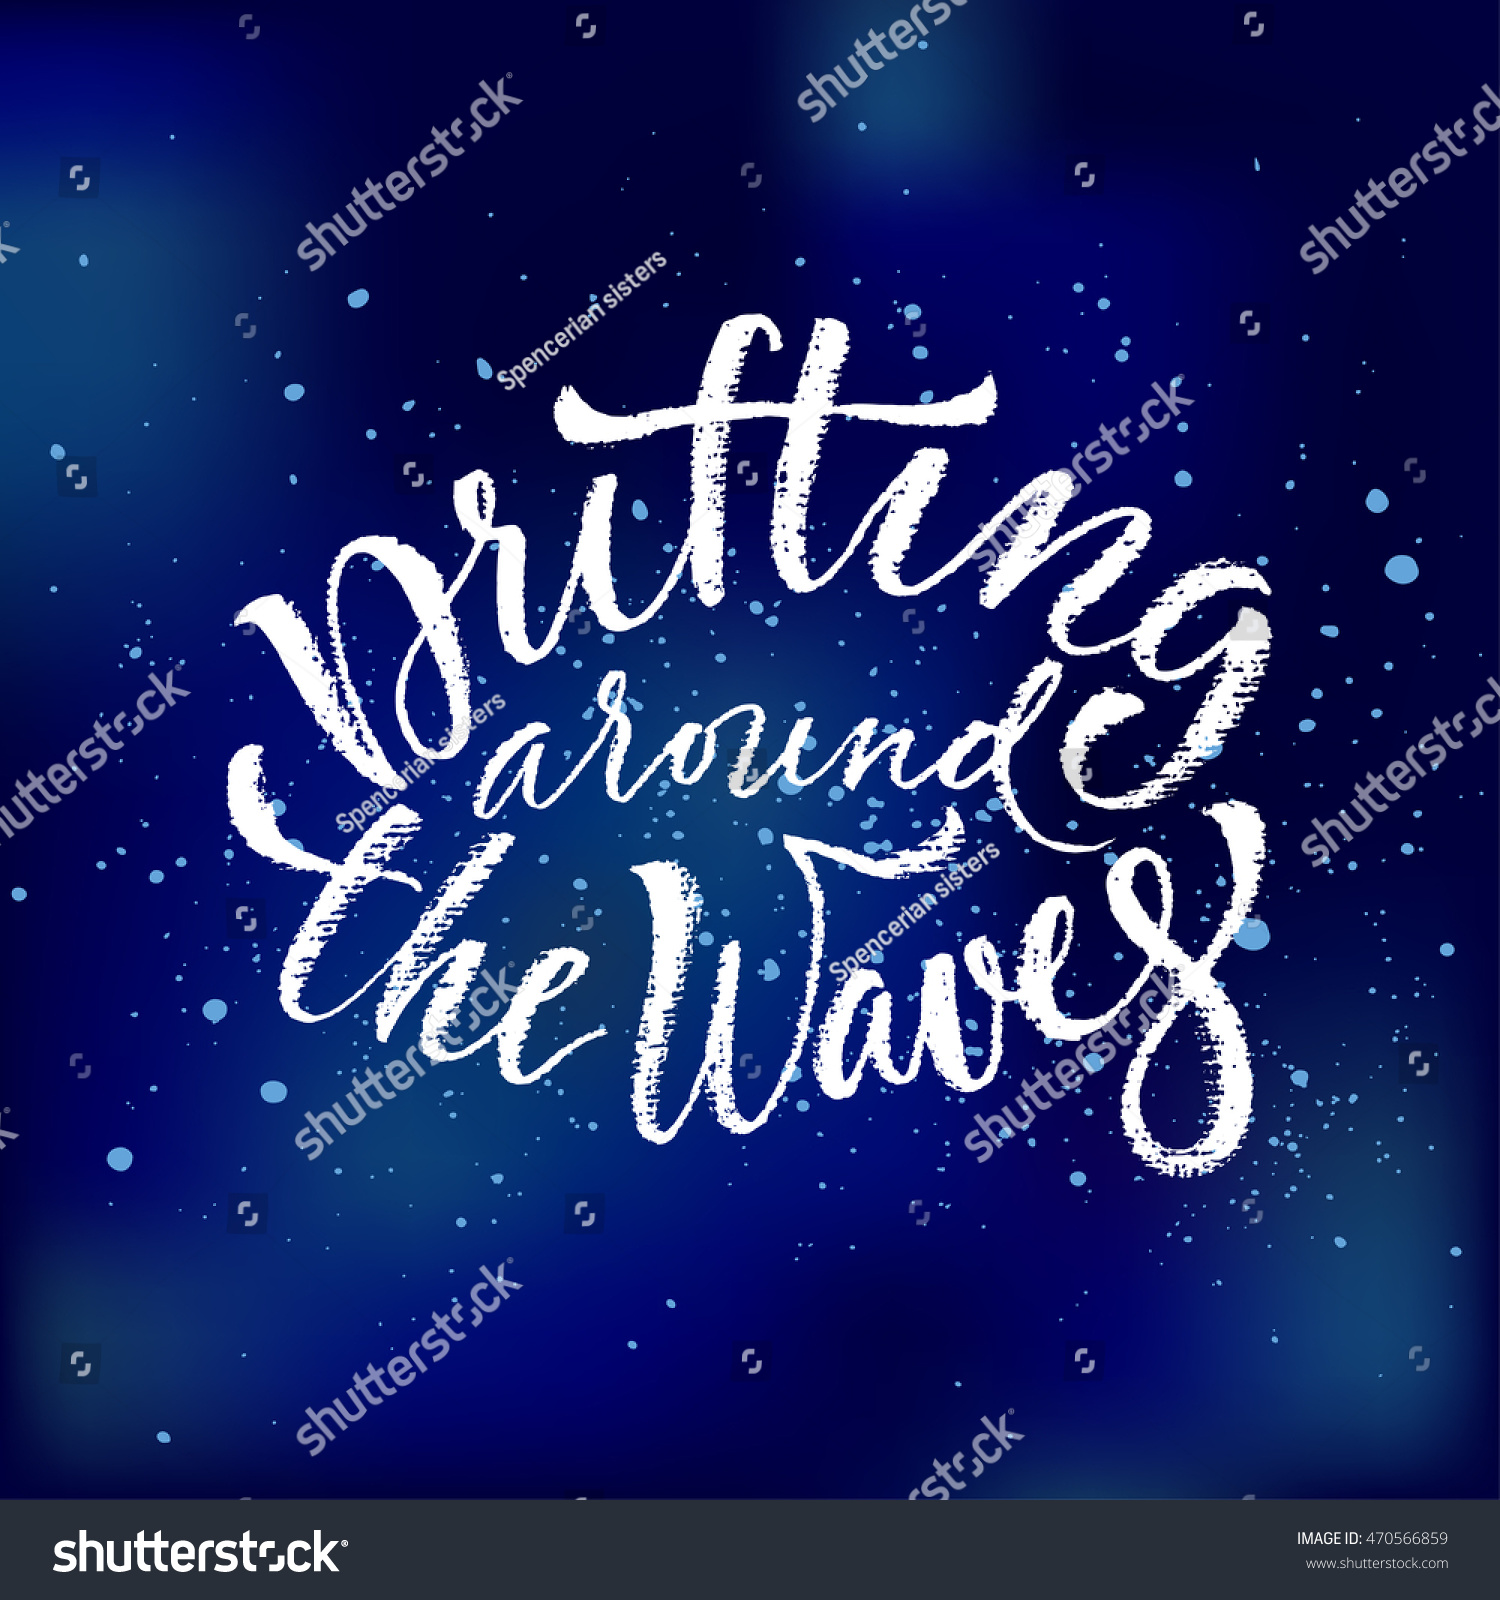 Drifting around the waves. Vector hand written brush pen calligraphy phrase or quote. Cute isolated letters on an abstract background. #470566859